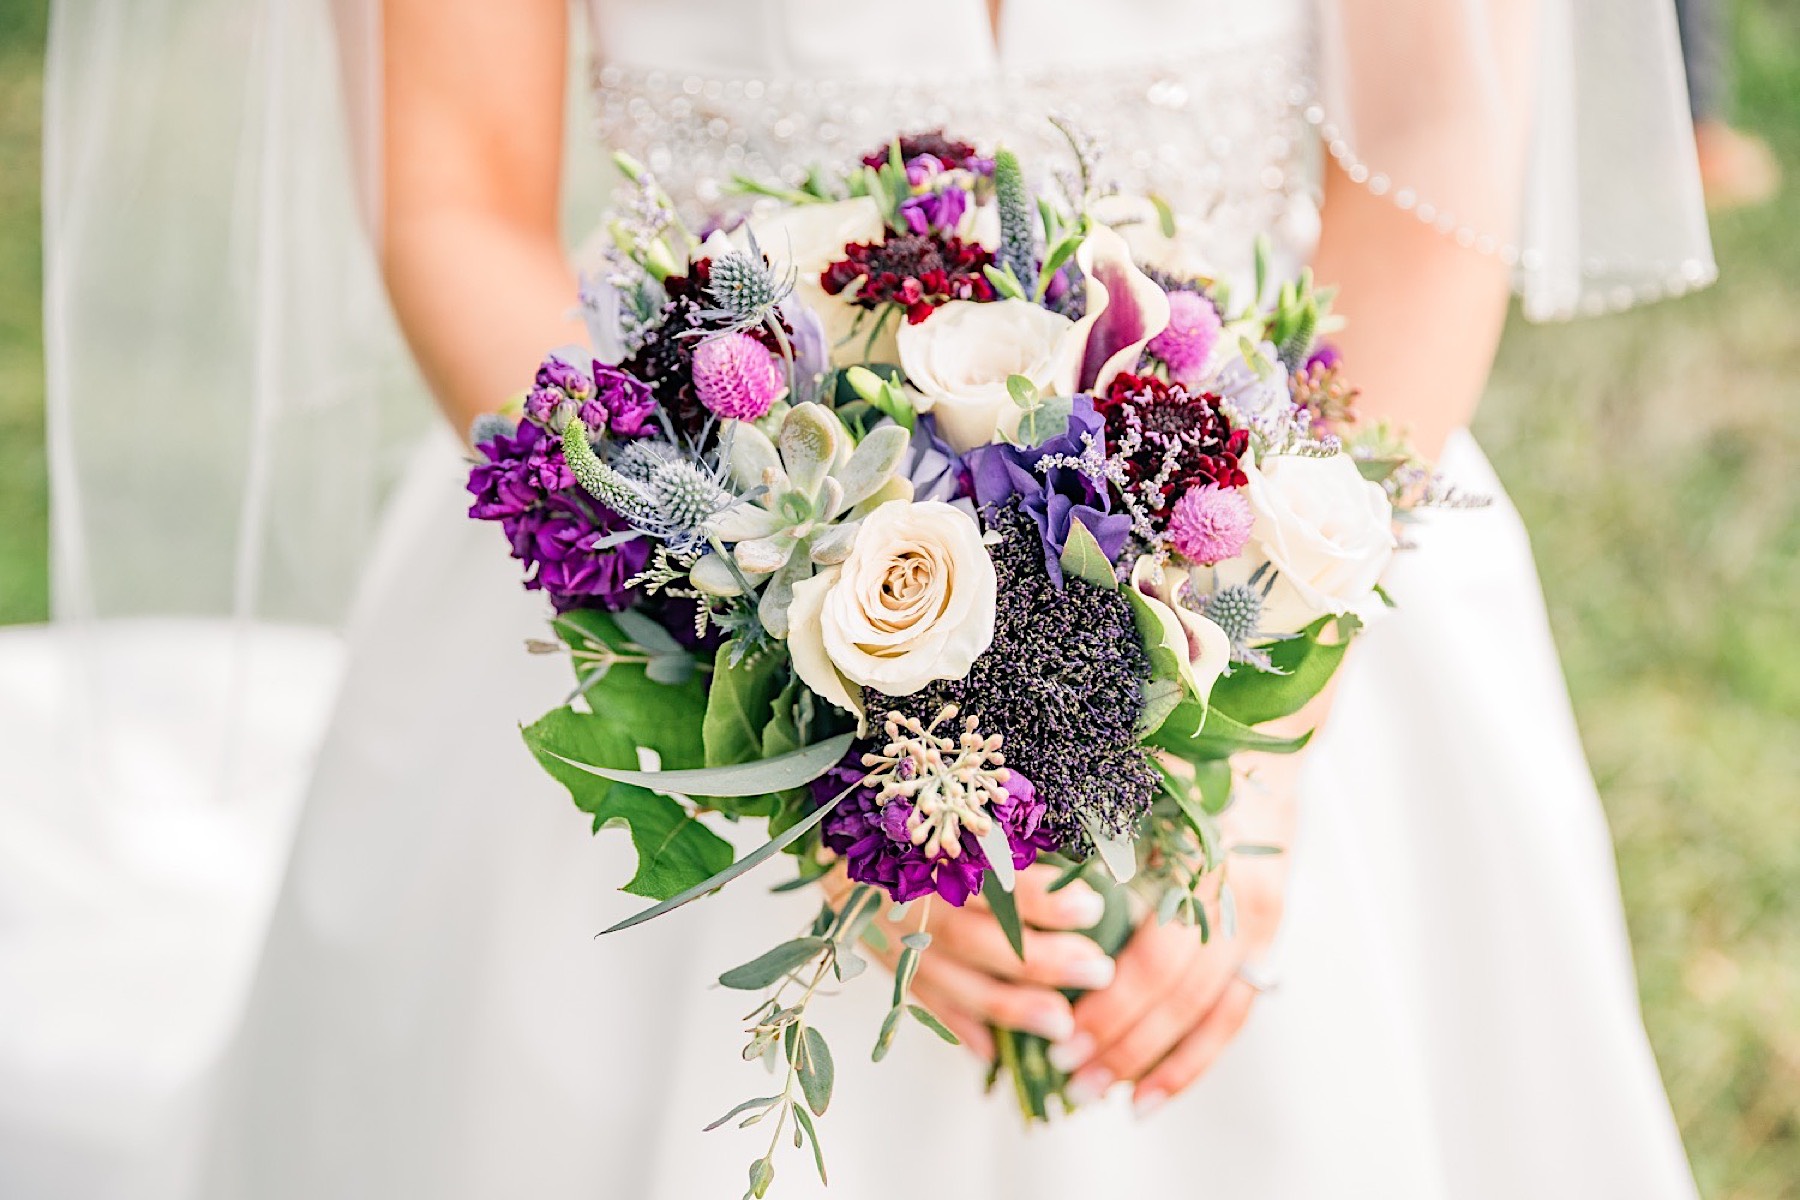 Purple and Green bouquet by Jill Lewko at the Barn on Bridge in Collegeville Photos